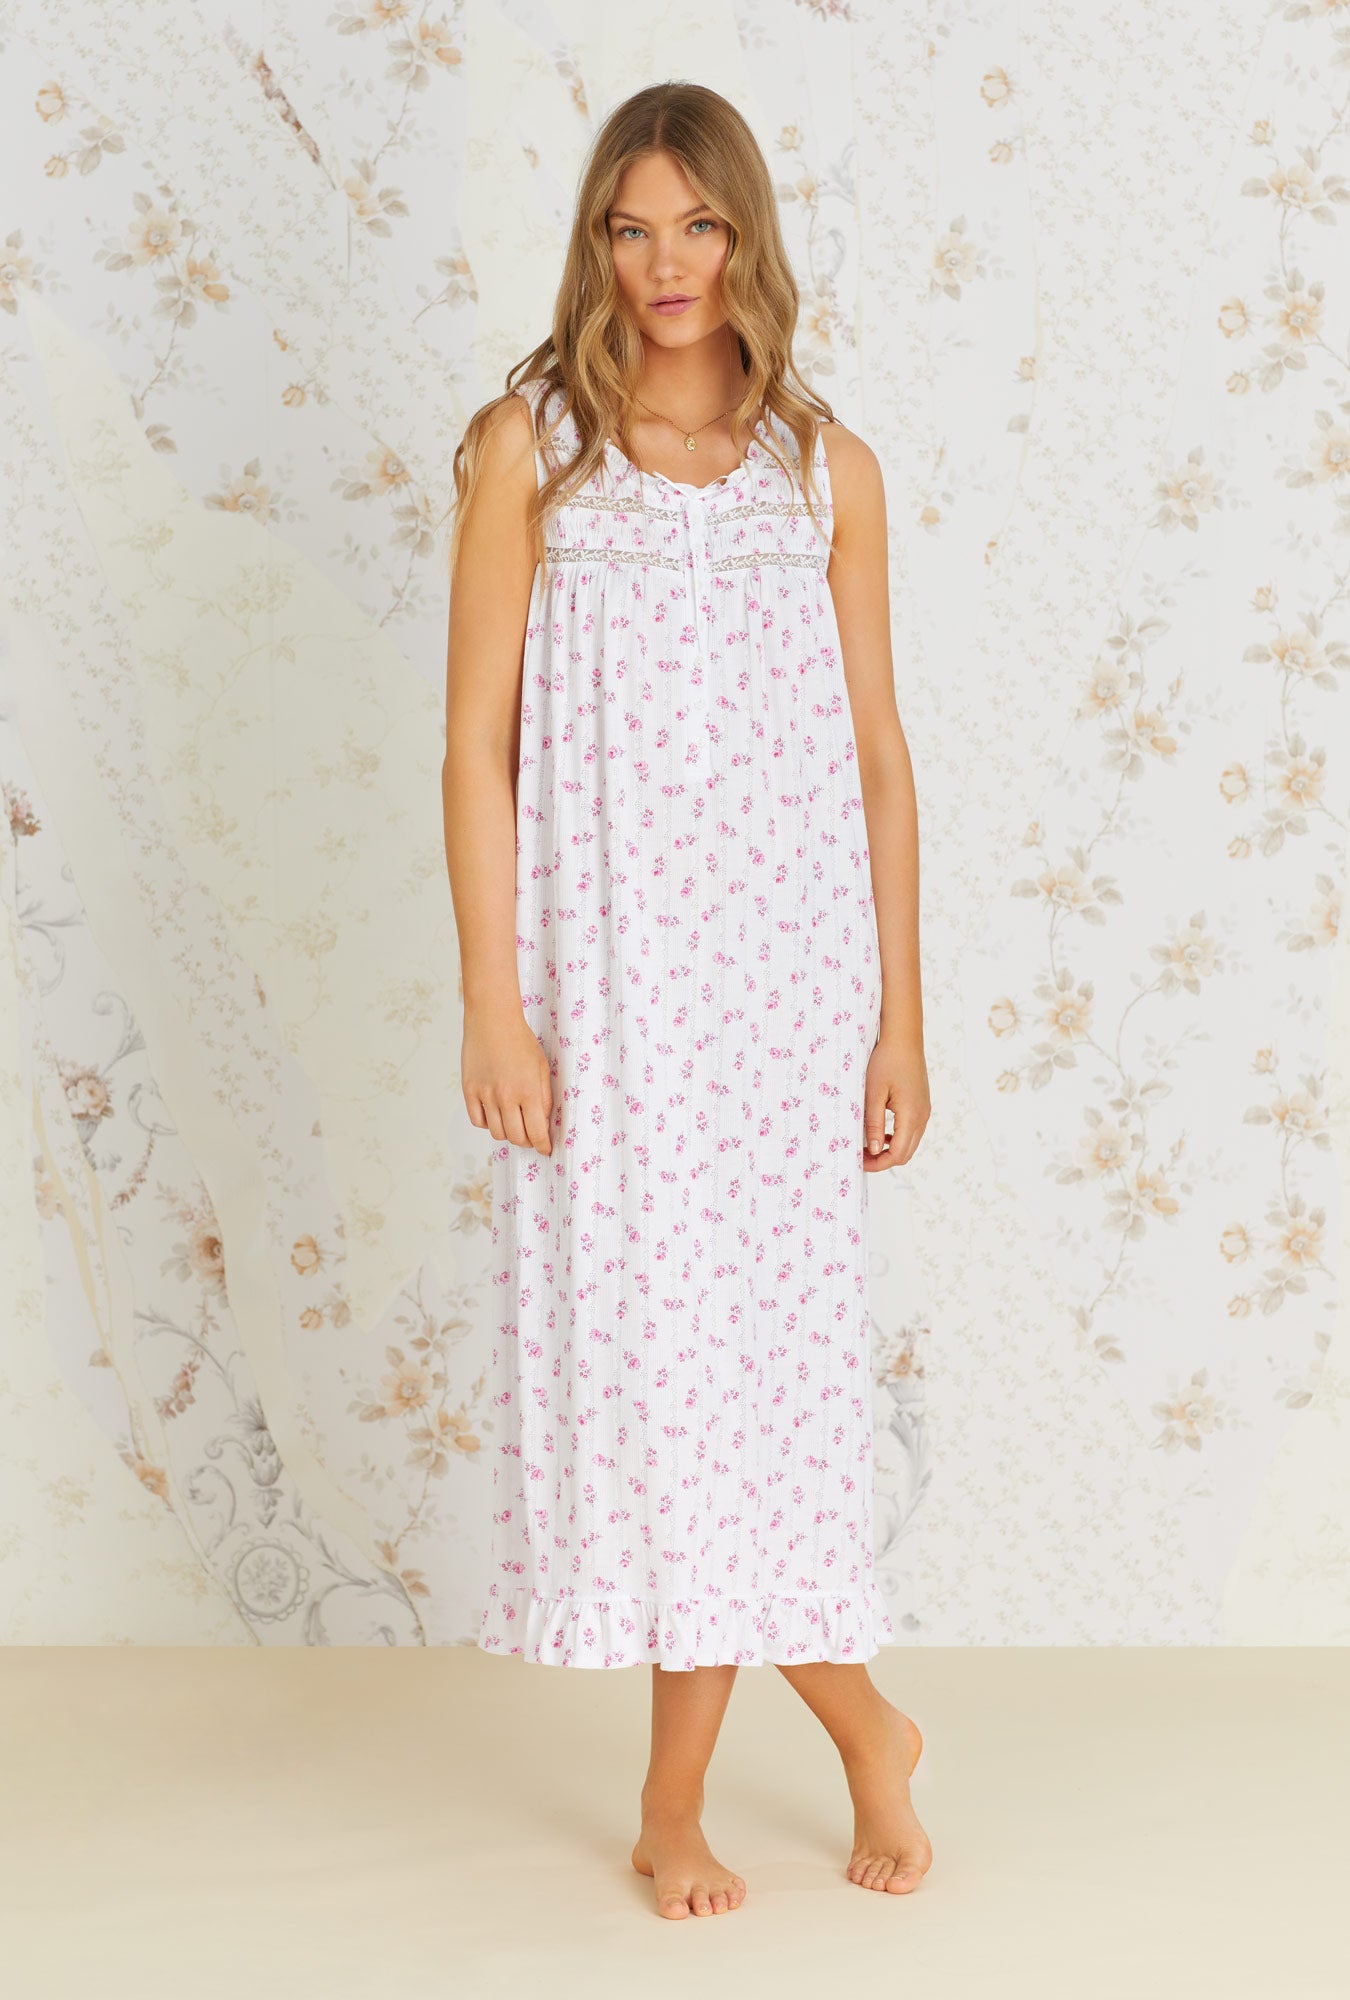 A lady wearing white sleeveless nursing nightgown with vintage rose pointelle print.